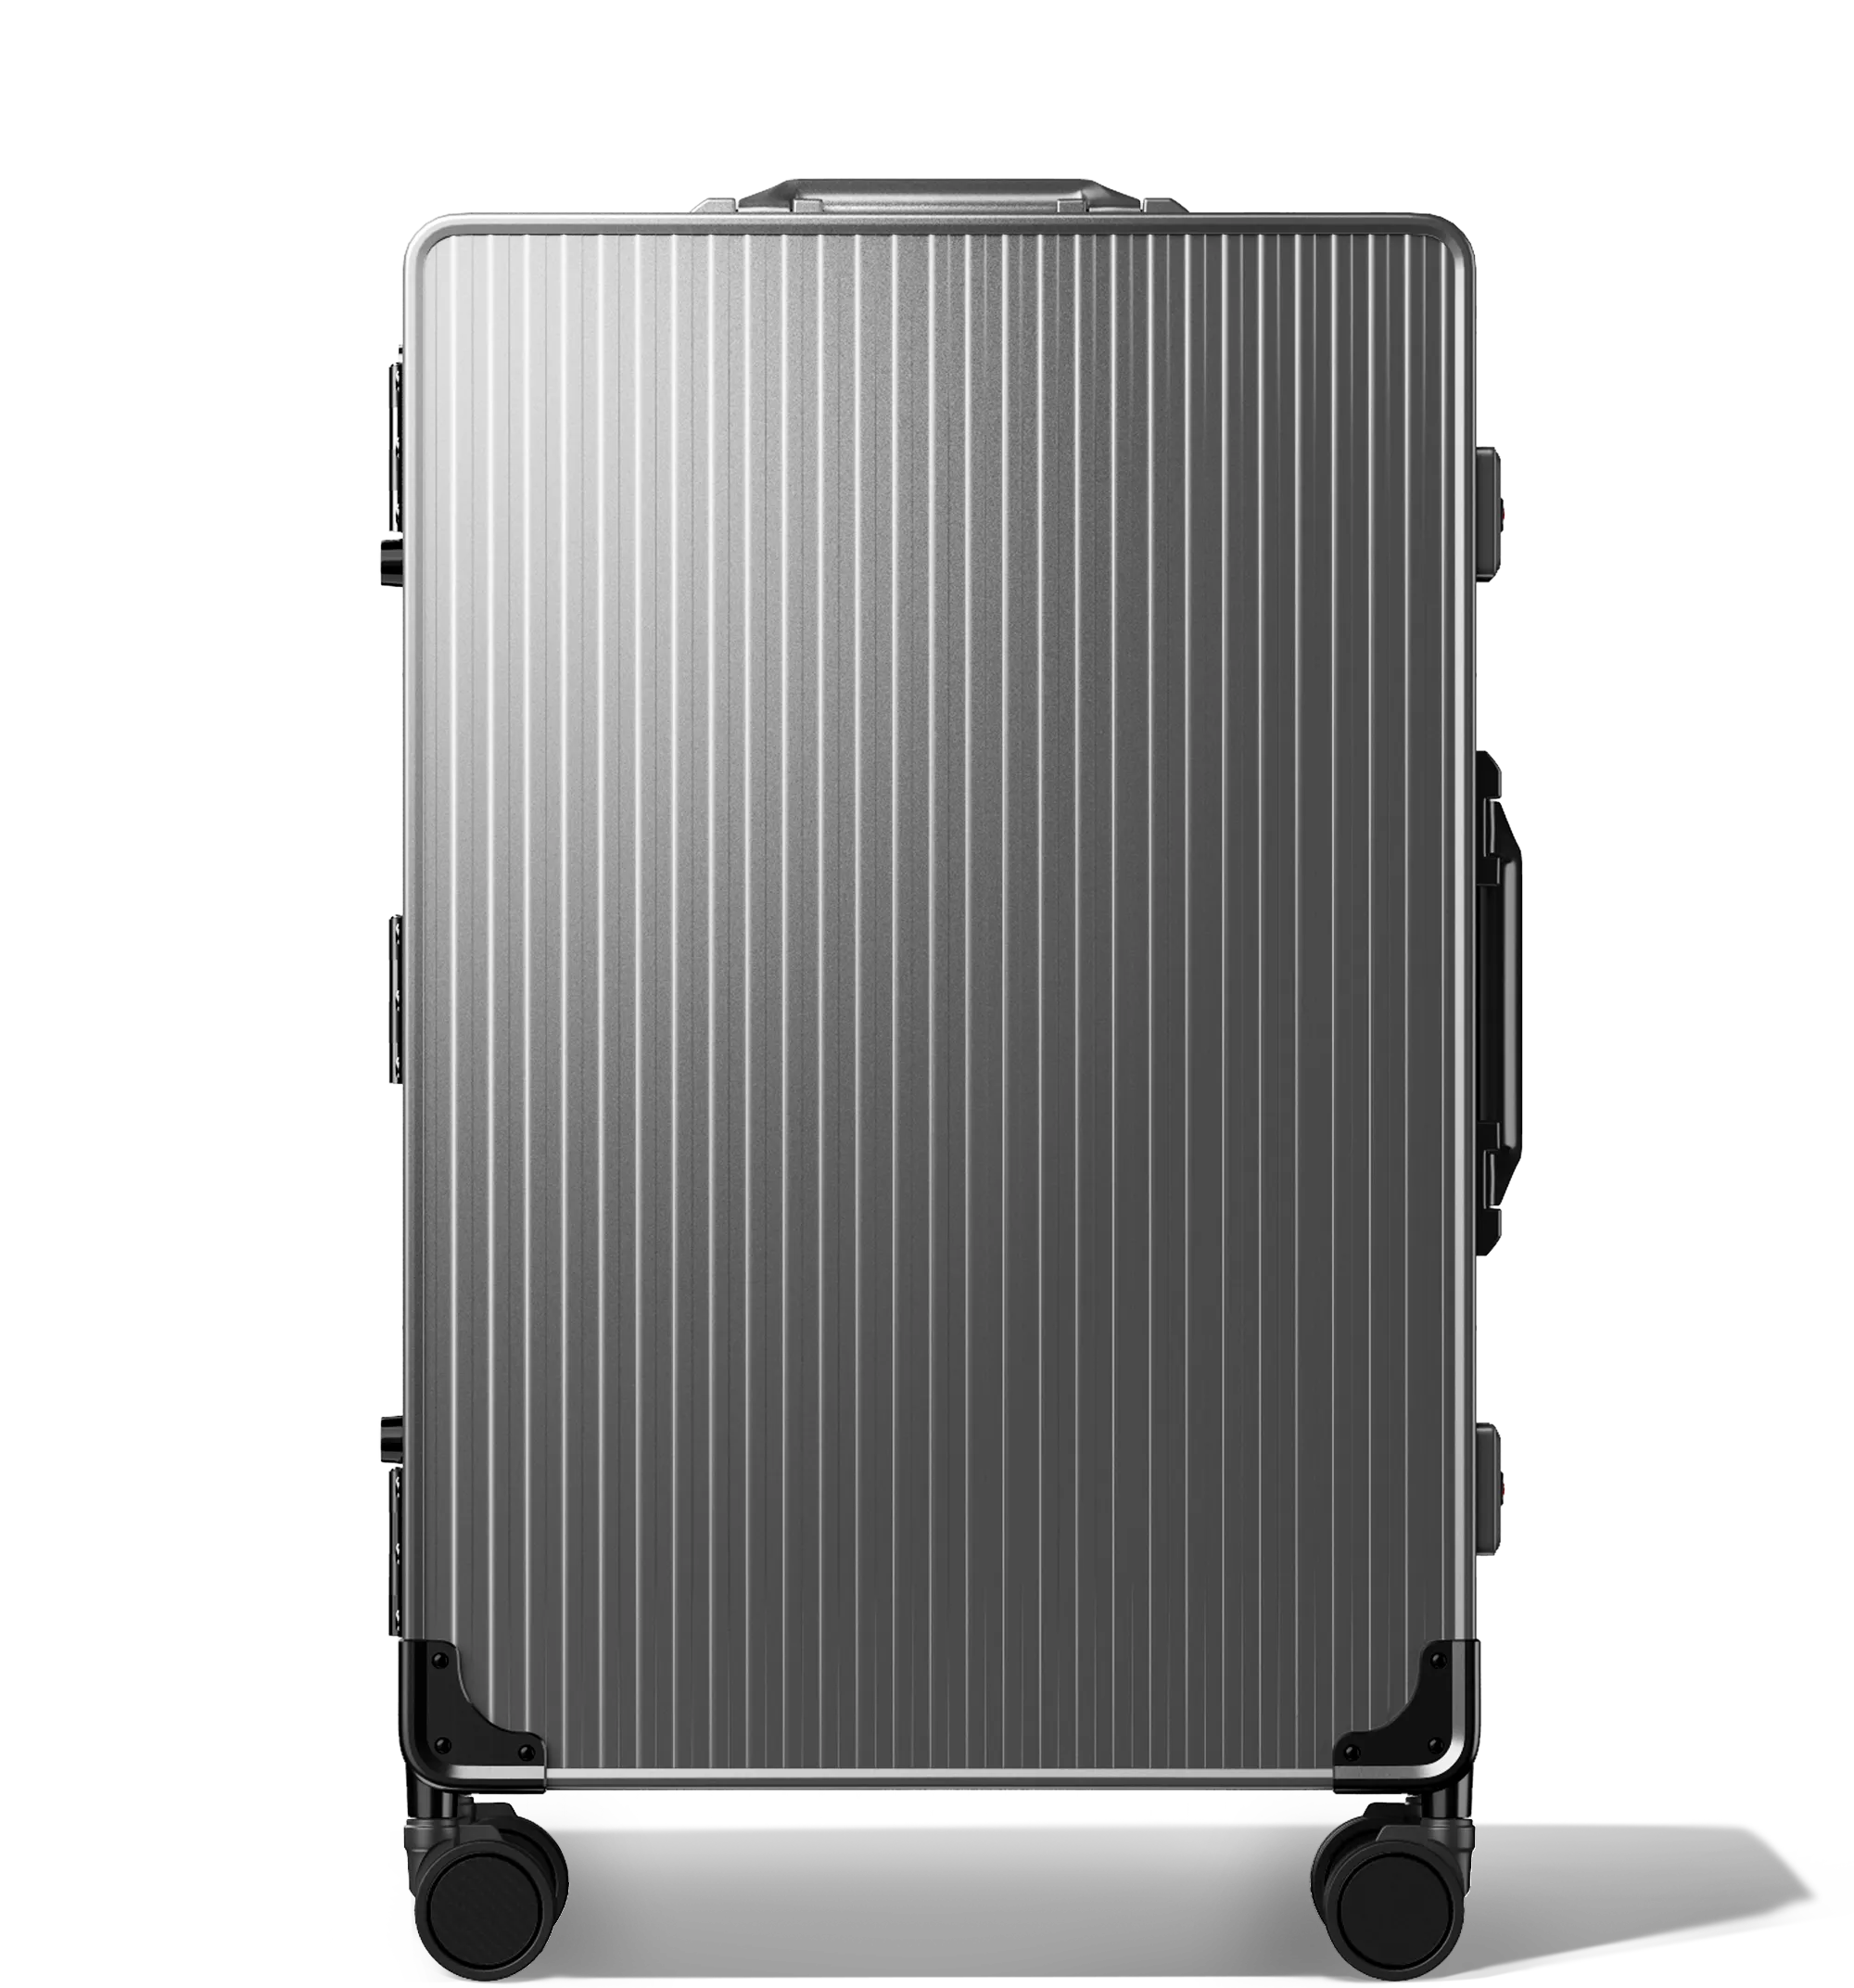 A vertical image of a Check-In 65/25 luggage , upright, Gun Metal hard-shell aluminium Luggage with a grooved surface design and multi-directional wheels, shown against a white background.